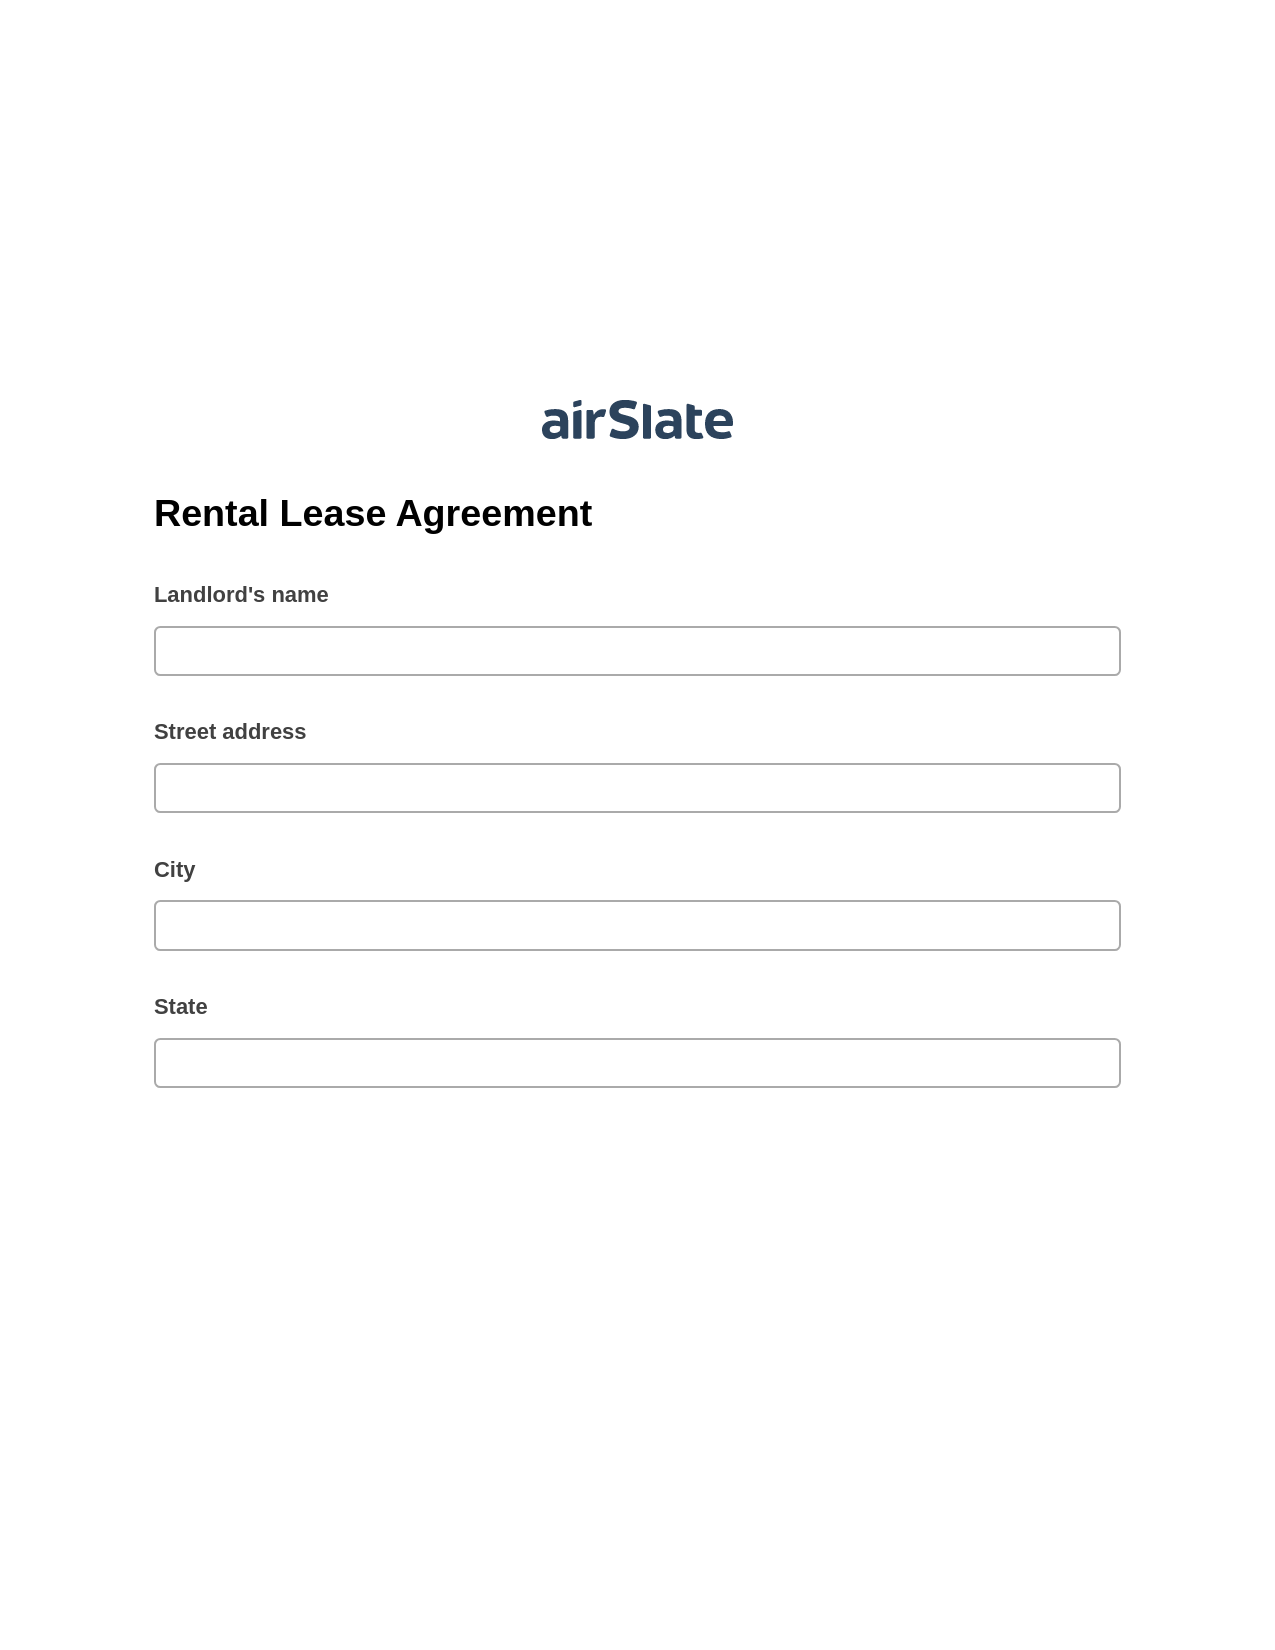 Rental Lease Agreement Pre-fill from CSV File Dropdown Options Bot, Google Cloud Print Bot, Export to Smartsheet